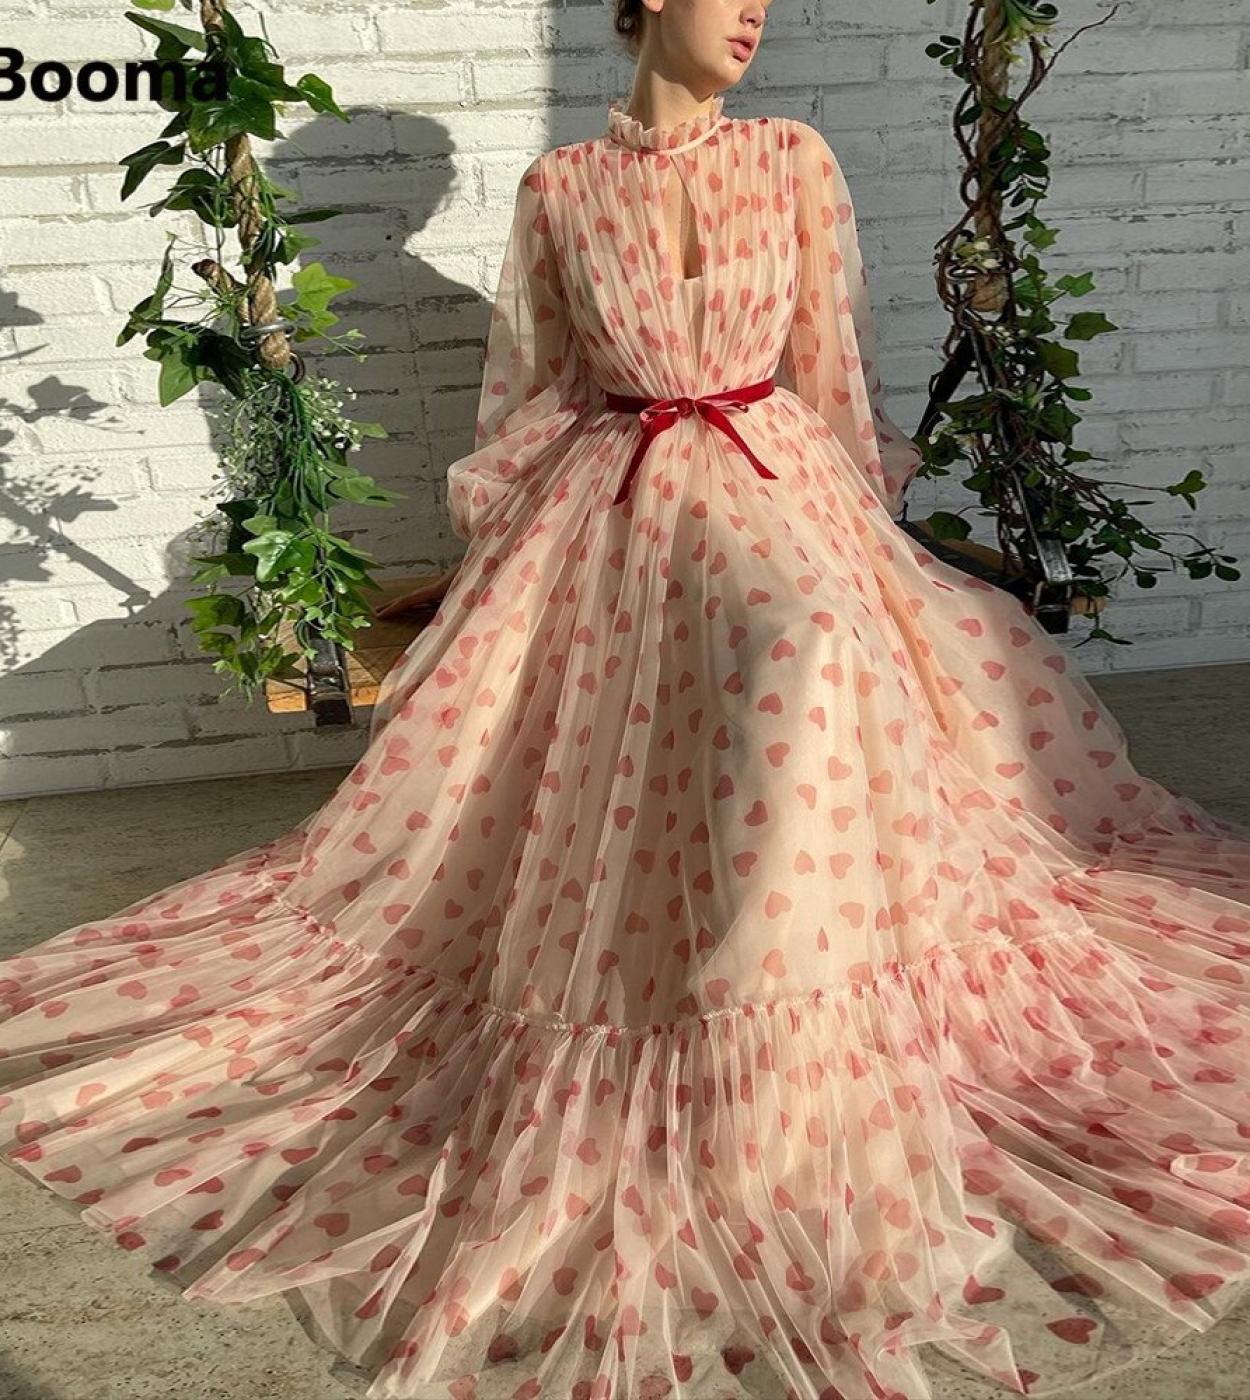 Booma 2022 Hearts Tulle Aline Prom Dresses Long Sleeves Sheer Neckline Keyhole Bow Belt Maxi Prom Gowns Formal Party Gow